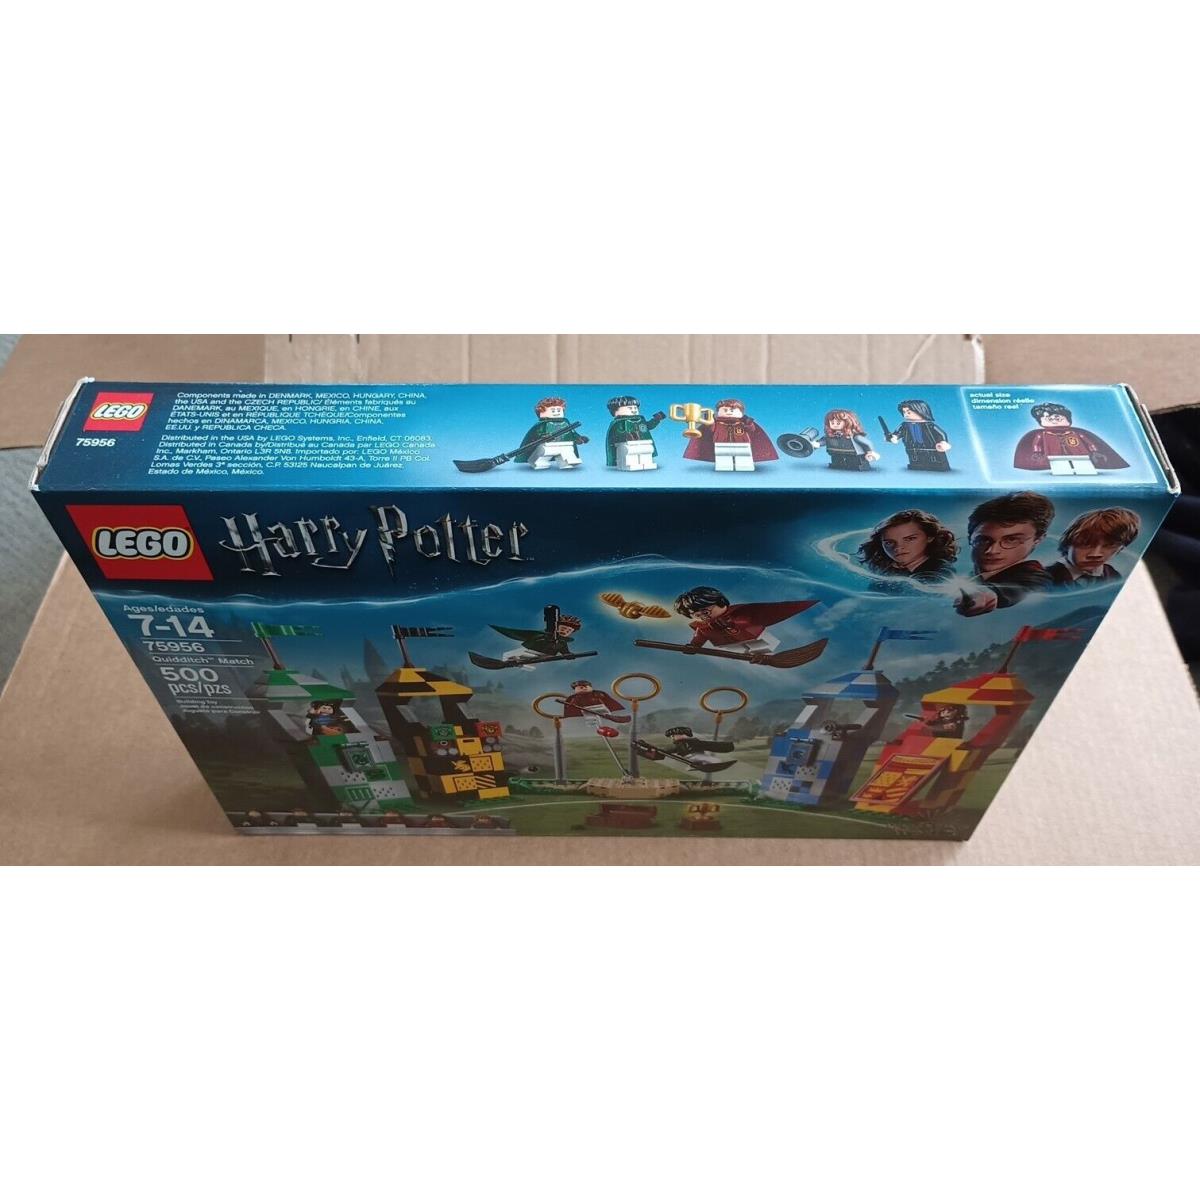 Lego Harry Potter 75956 Quidditch Match Retired Set In Box